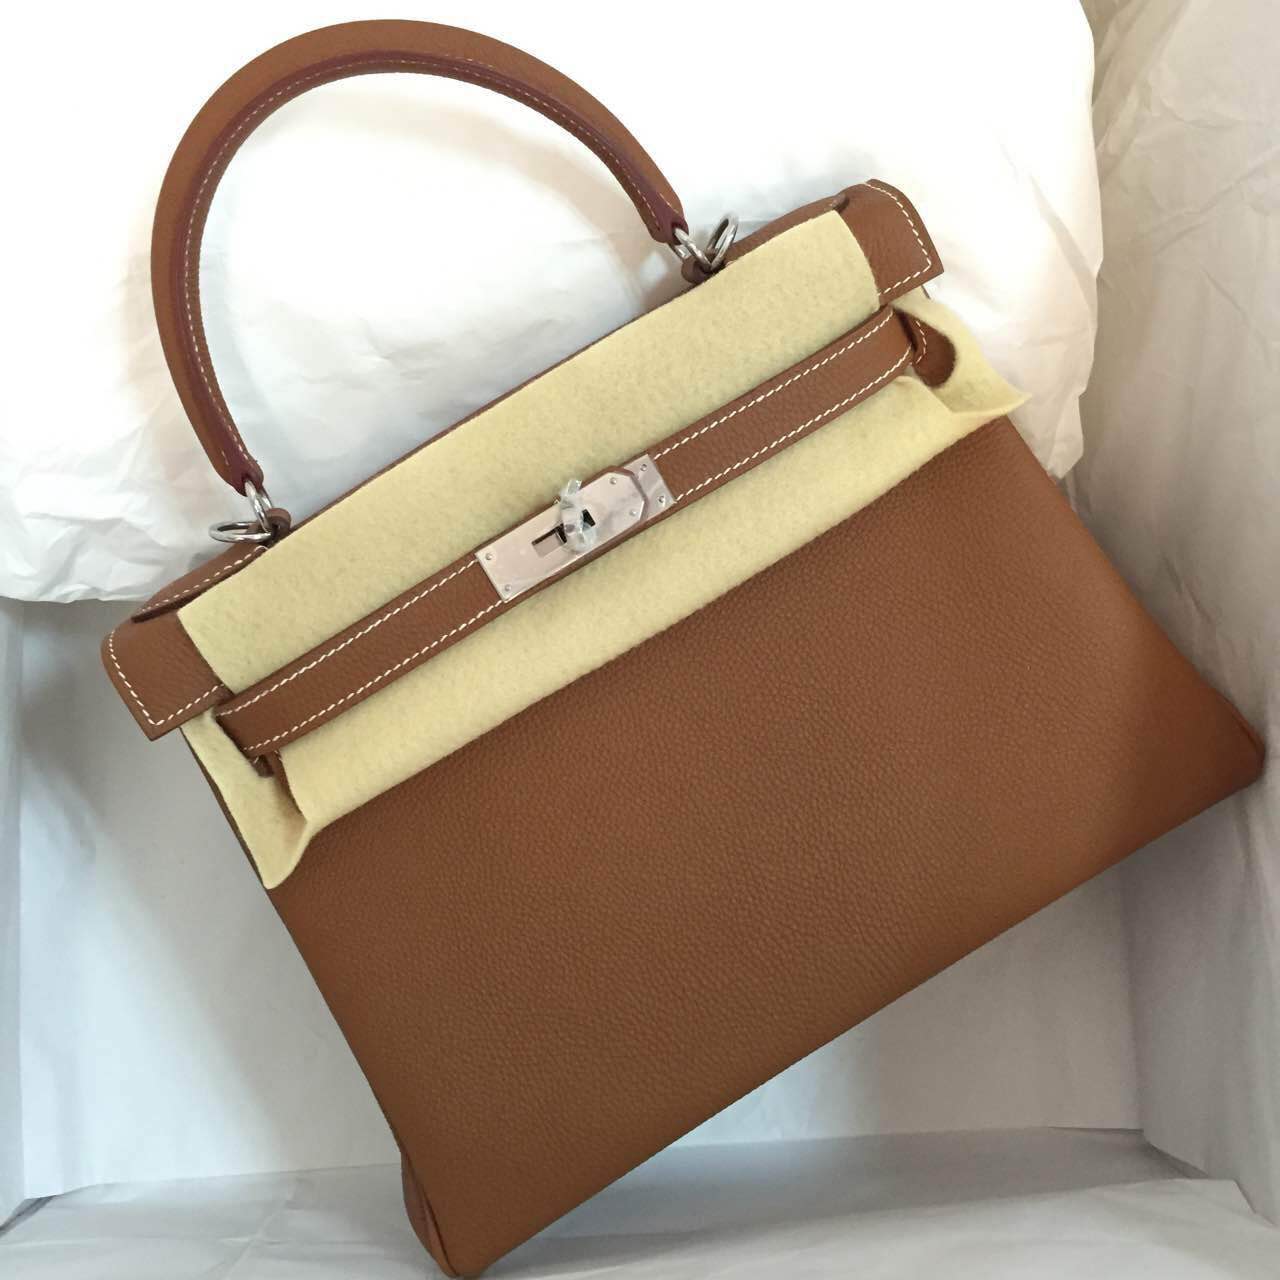 Hand Stitching C37 Light Coffee Togo Leather Hermes Kelly Bag ...